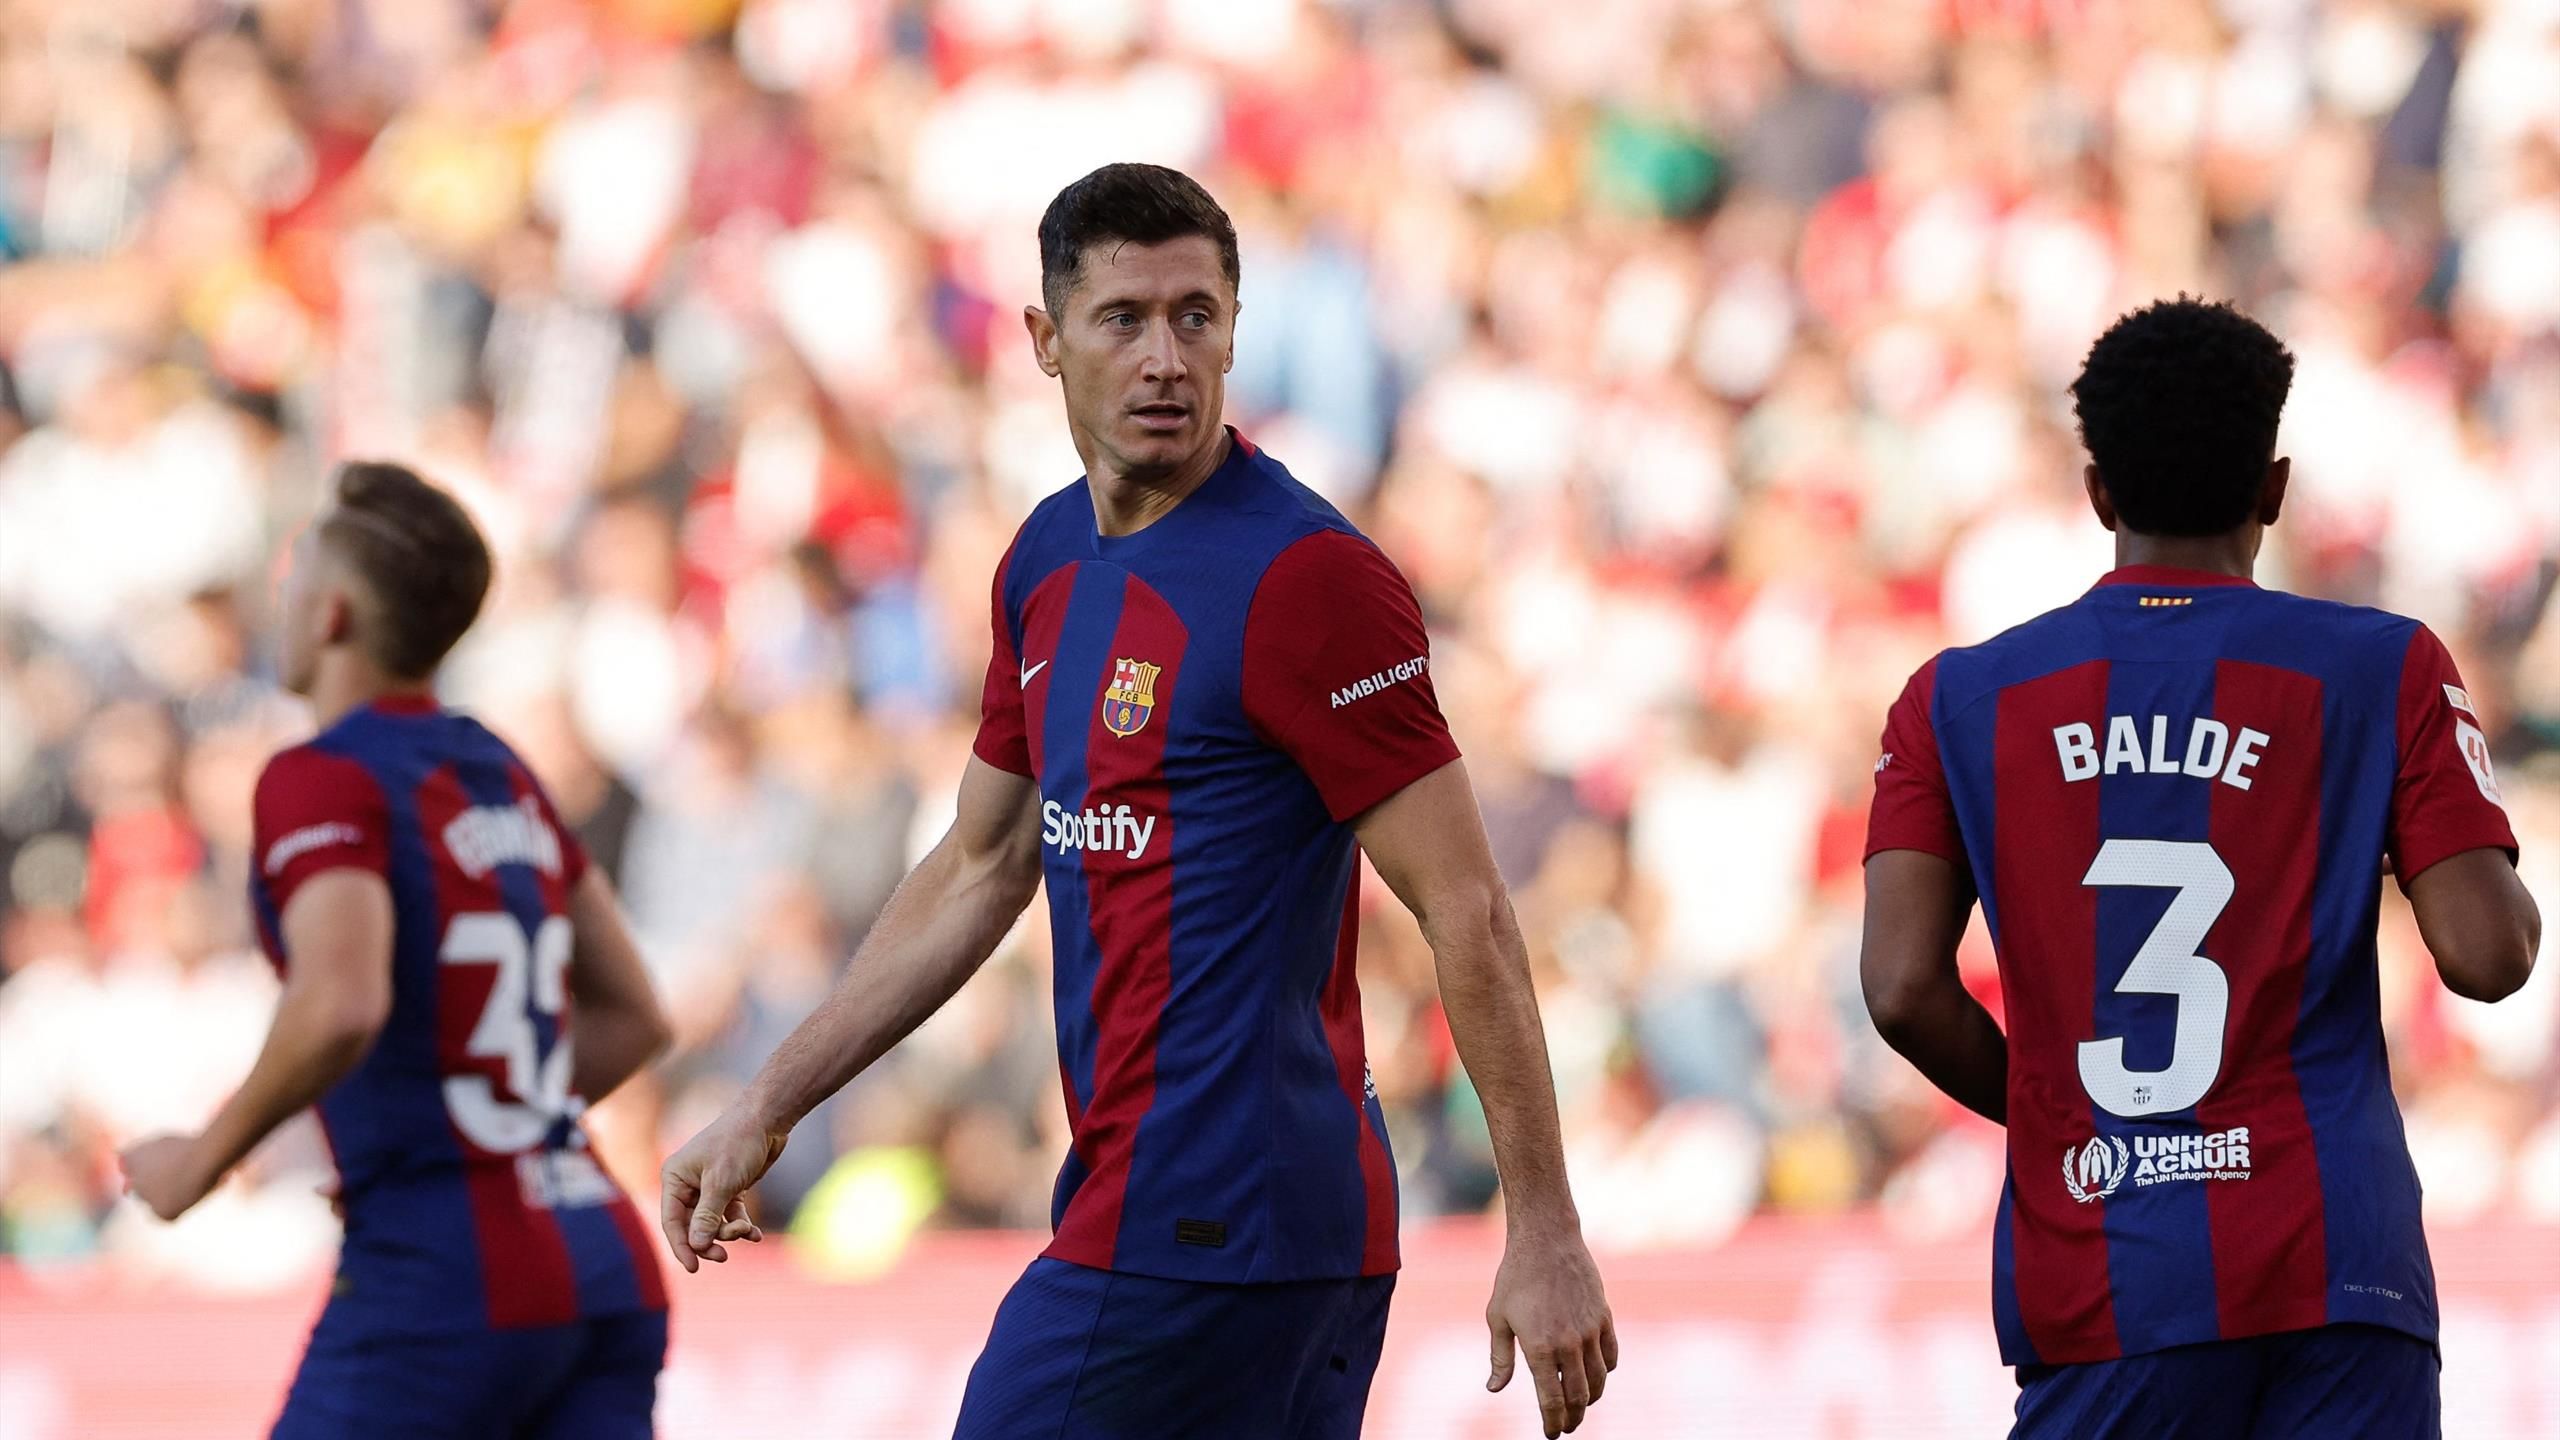 Own-goal gives Barcelona 1-1 draw with Rayo Vallecano, The Wimmera  Mail-Times